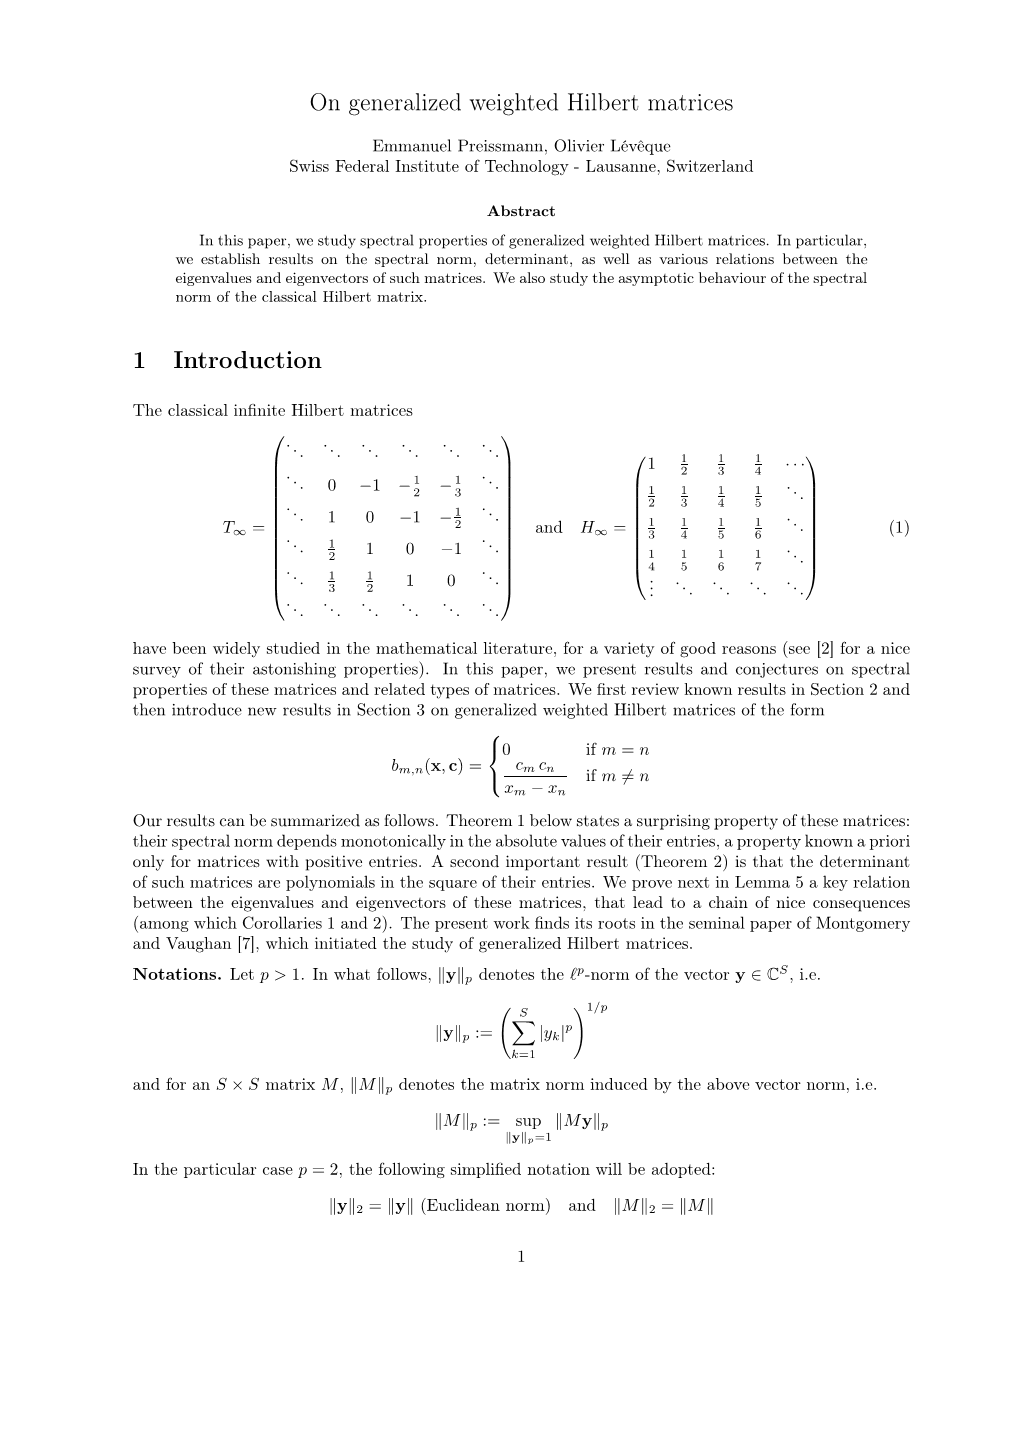 On Generalized Weighted Hilbert Matrices 1 Introduction